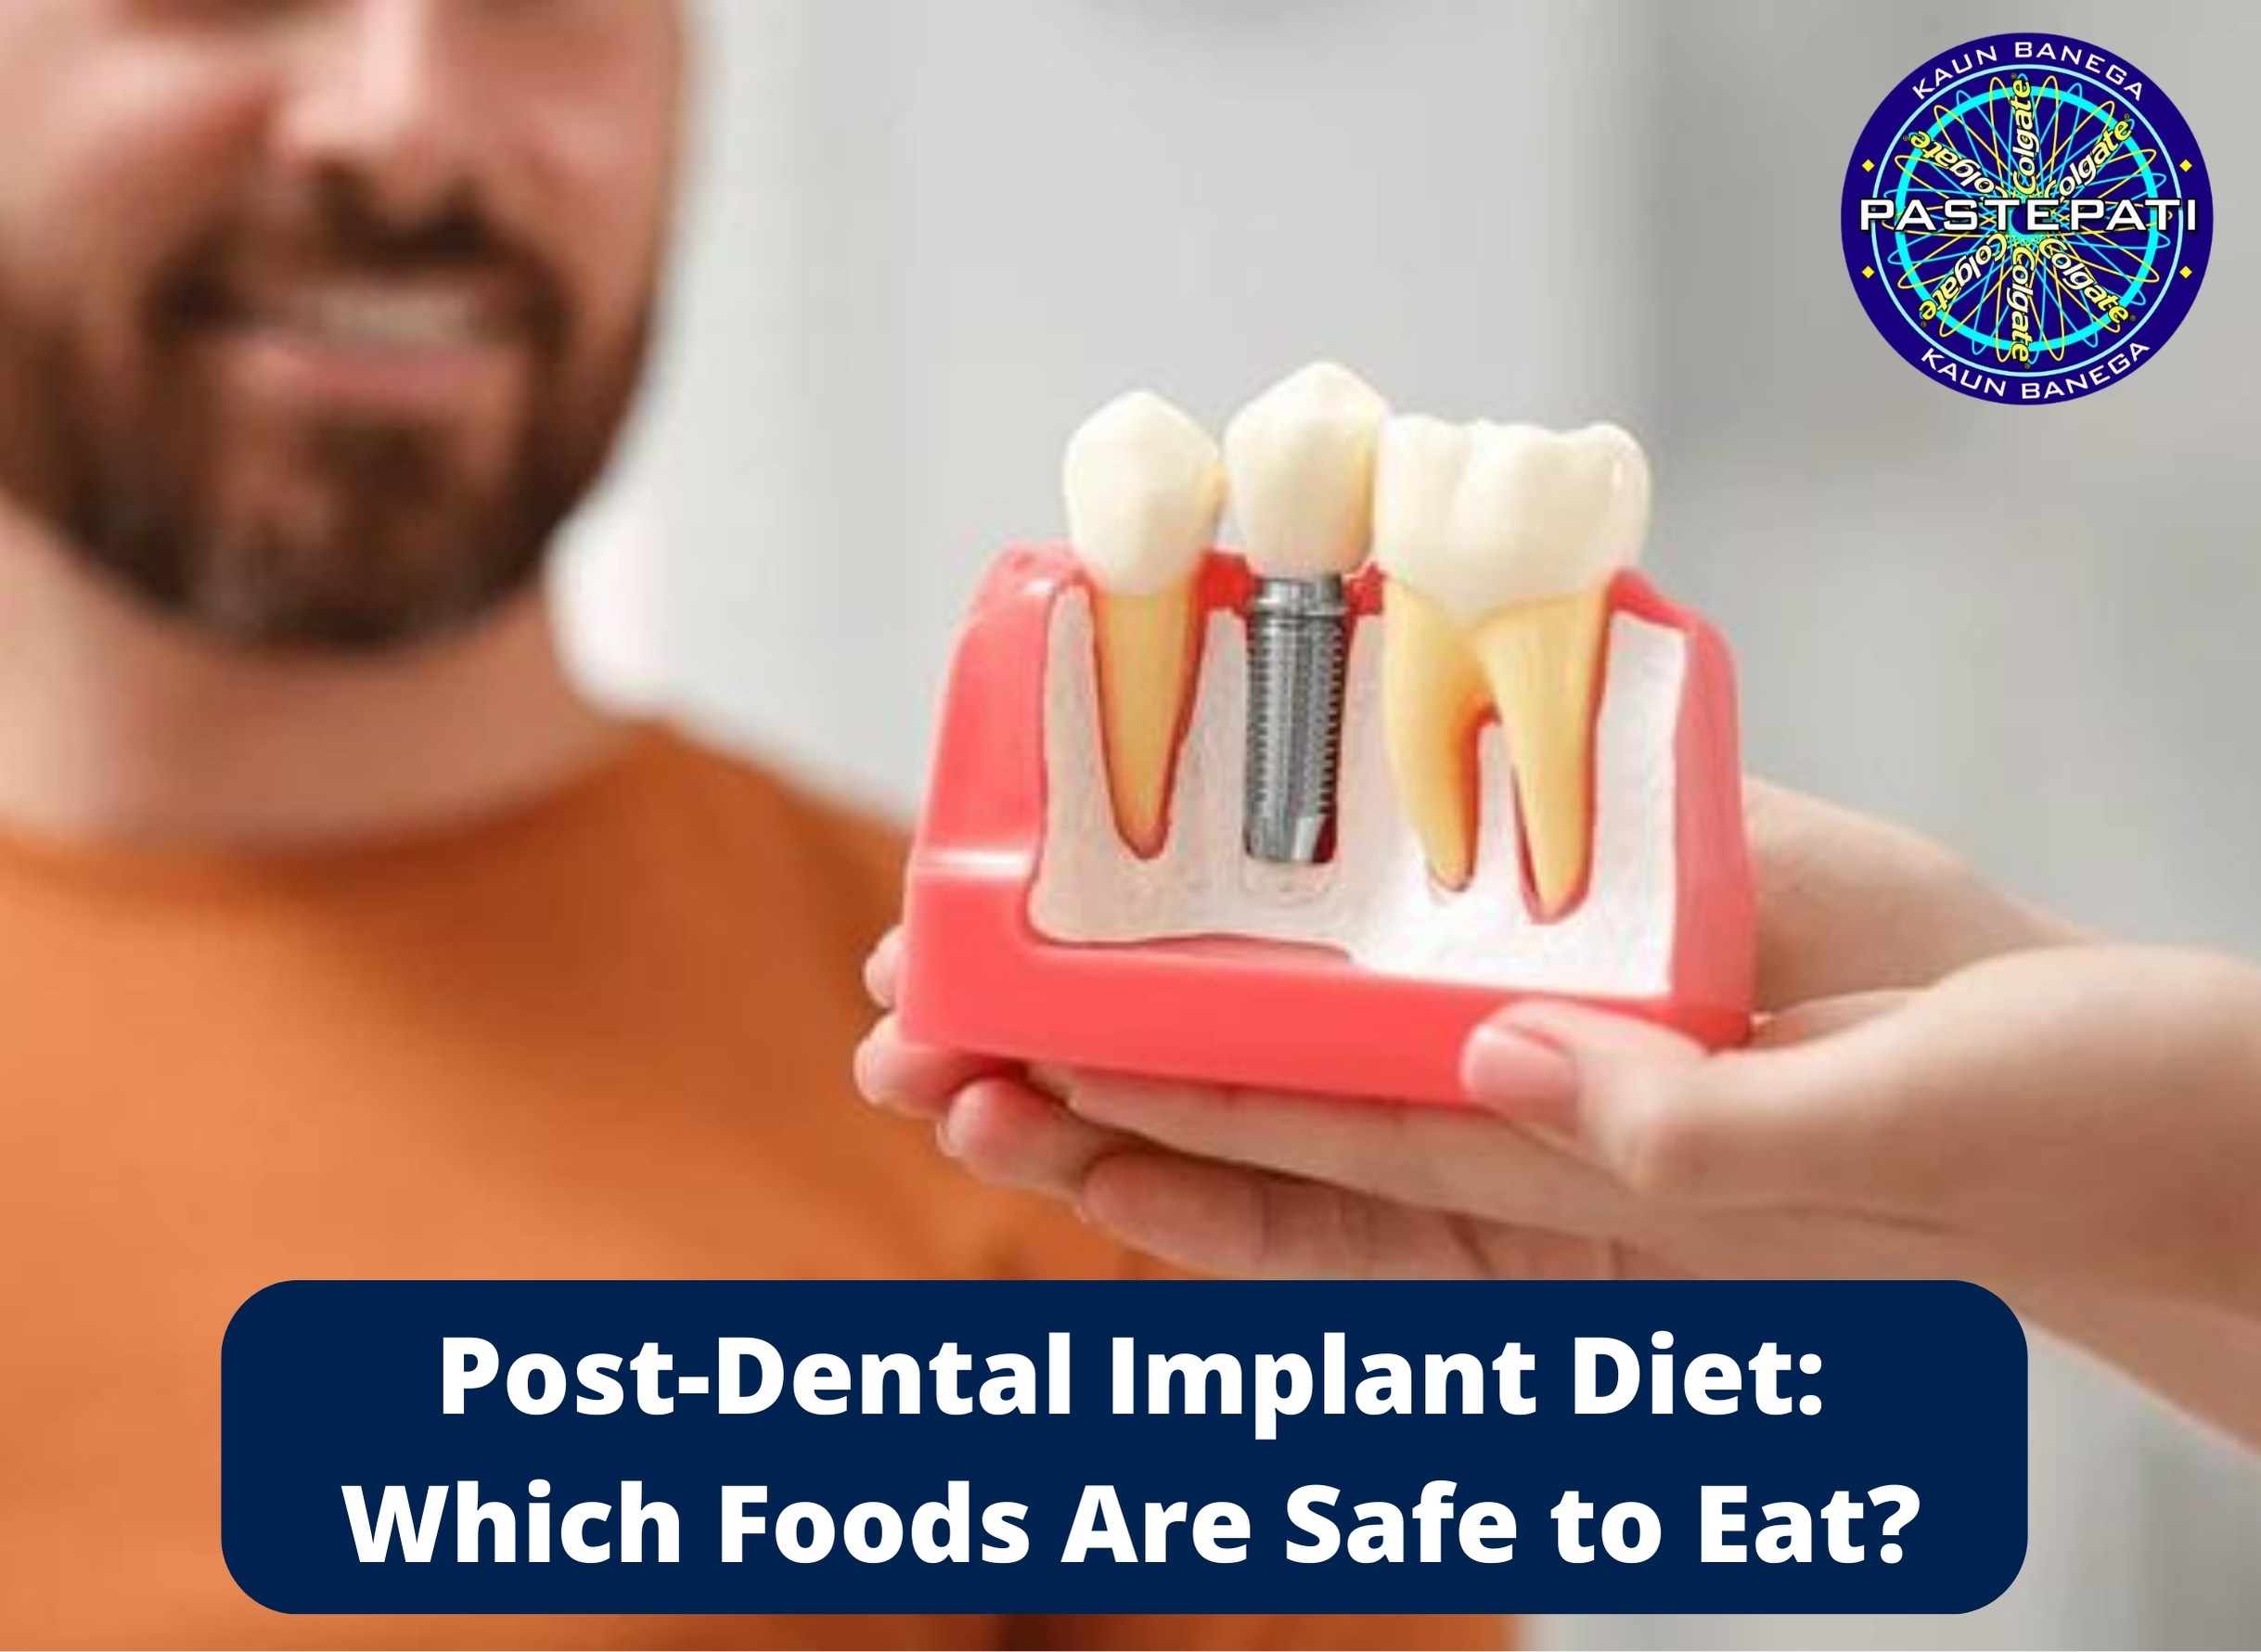 Post-Dental Implant Diet: Which Foods Are Safe to Eat?